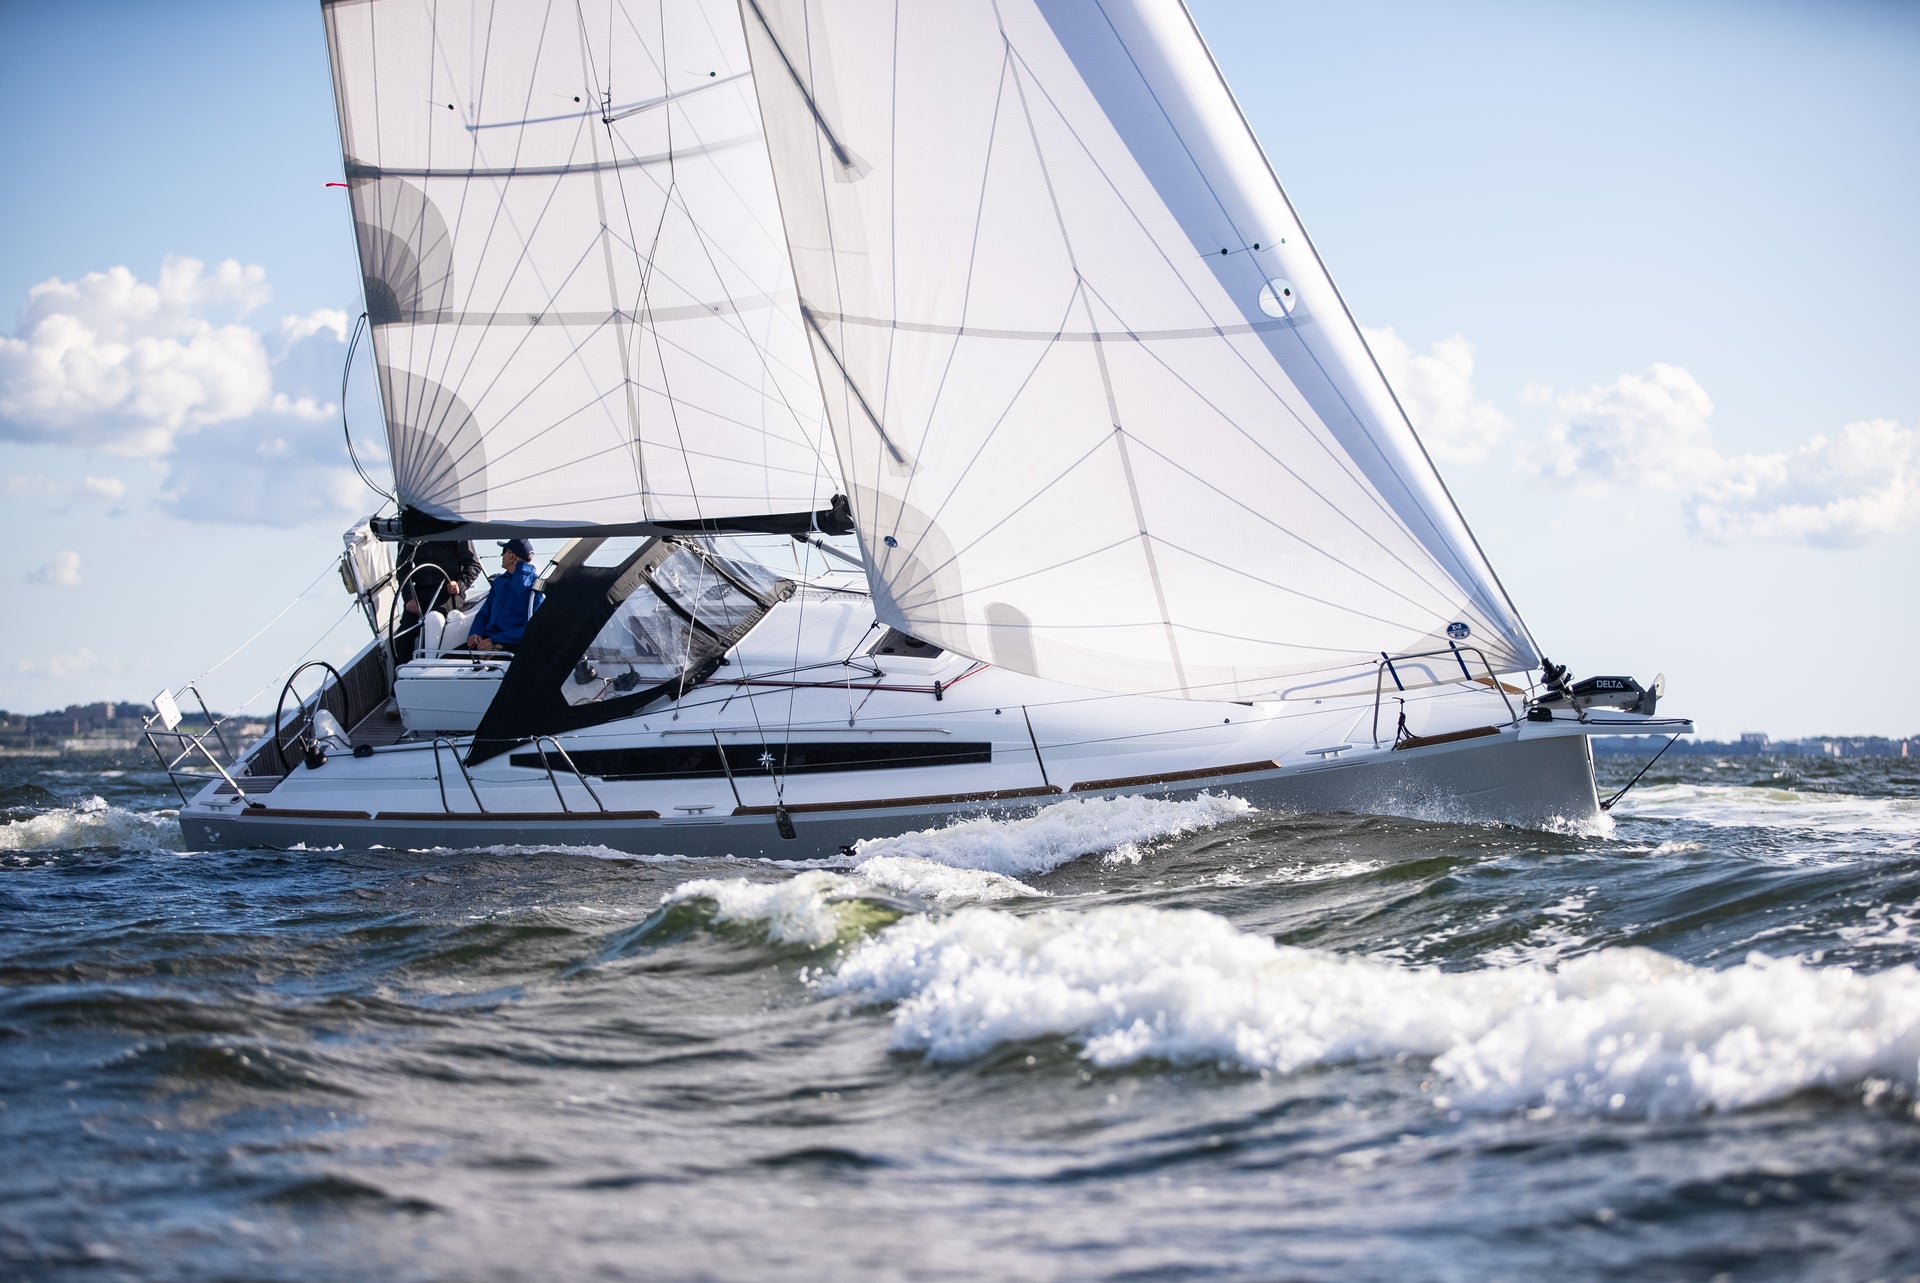 INTRODUCING NPL RENEW, A SUSTAINABLE SAILCLOTH FOR CRUISING